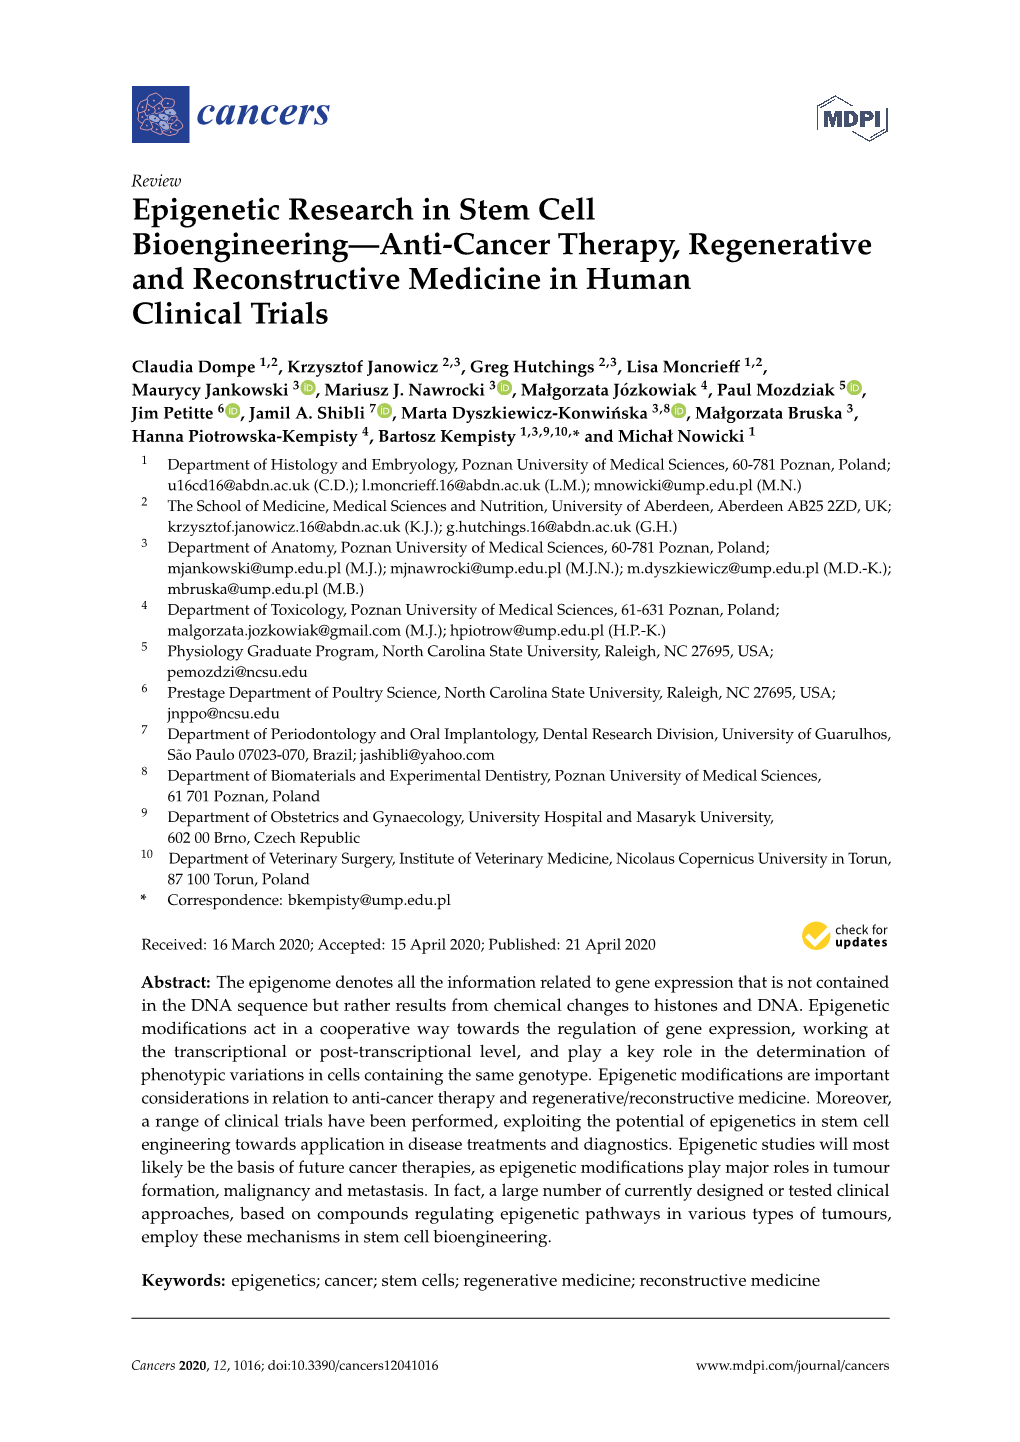 Epigenetic Research in Stem Cell Bioengineering—Anti-Cancer Therapy, Regenerative and Reconstructive Medicine in Human Clinical Trials